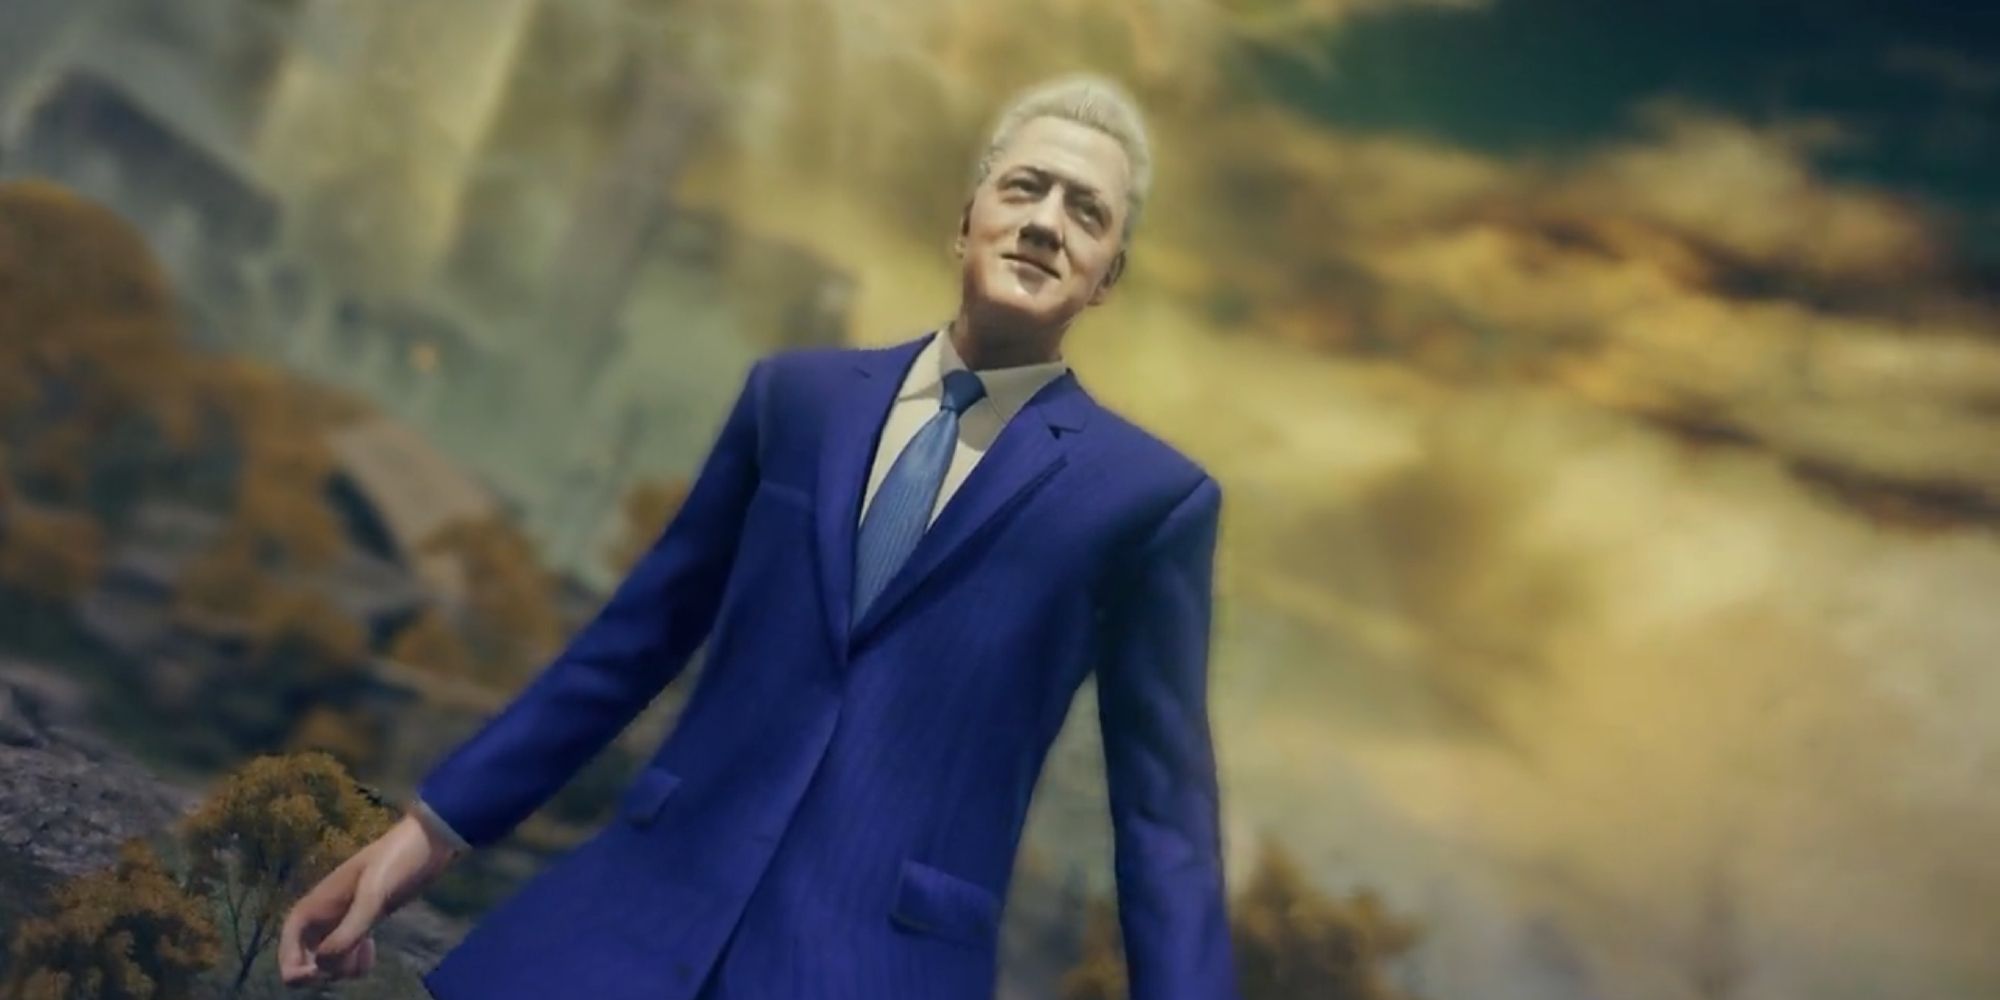 Someone made an Elden Ring Bill Clinton mod, because of course